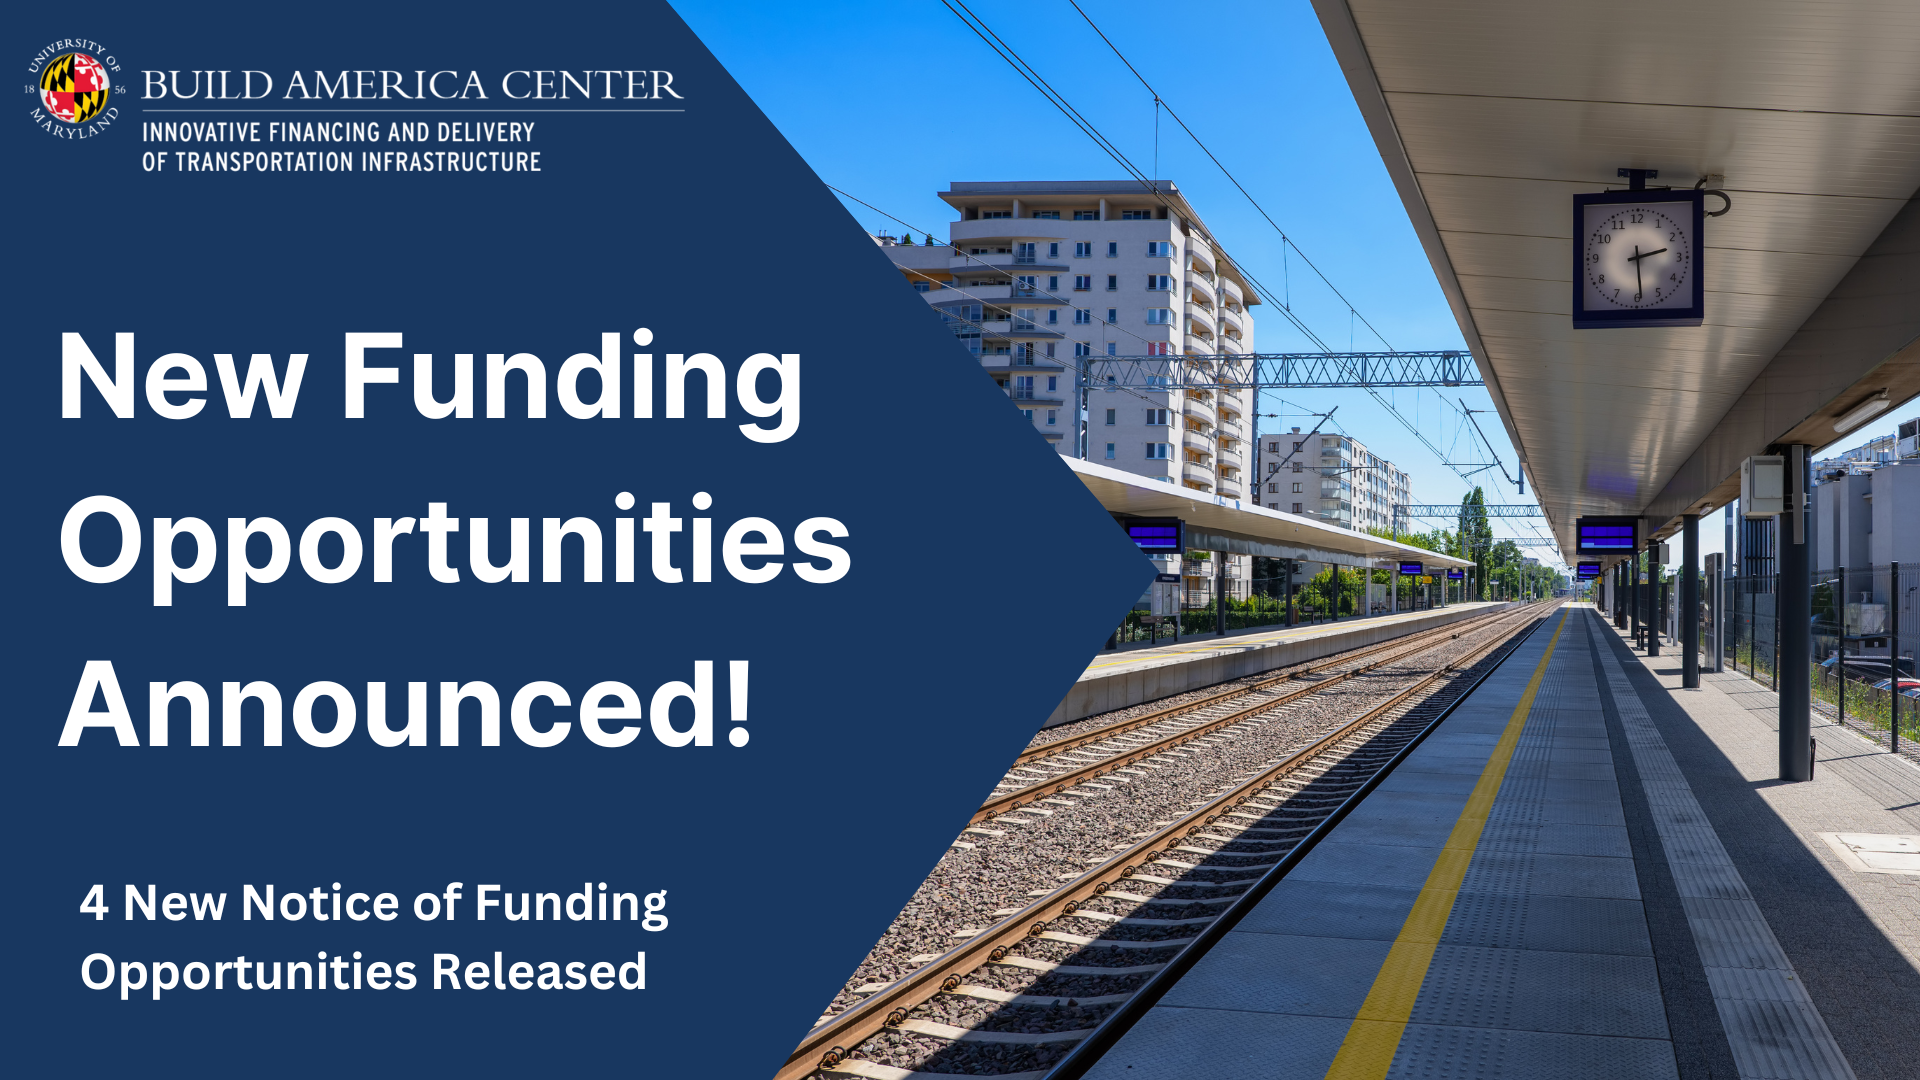 New Notice of Funding Opportunities Announced